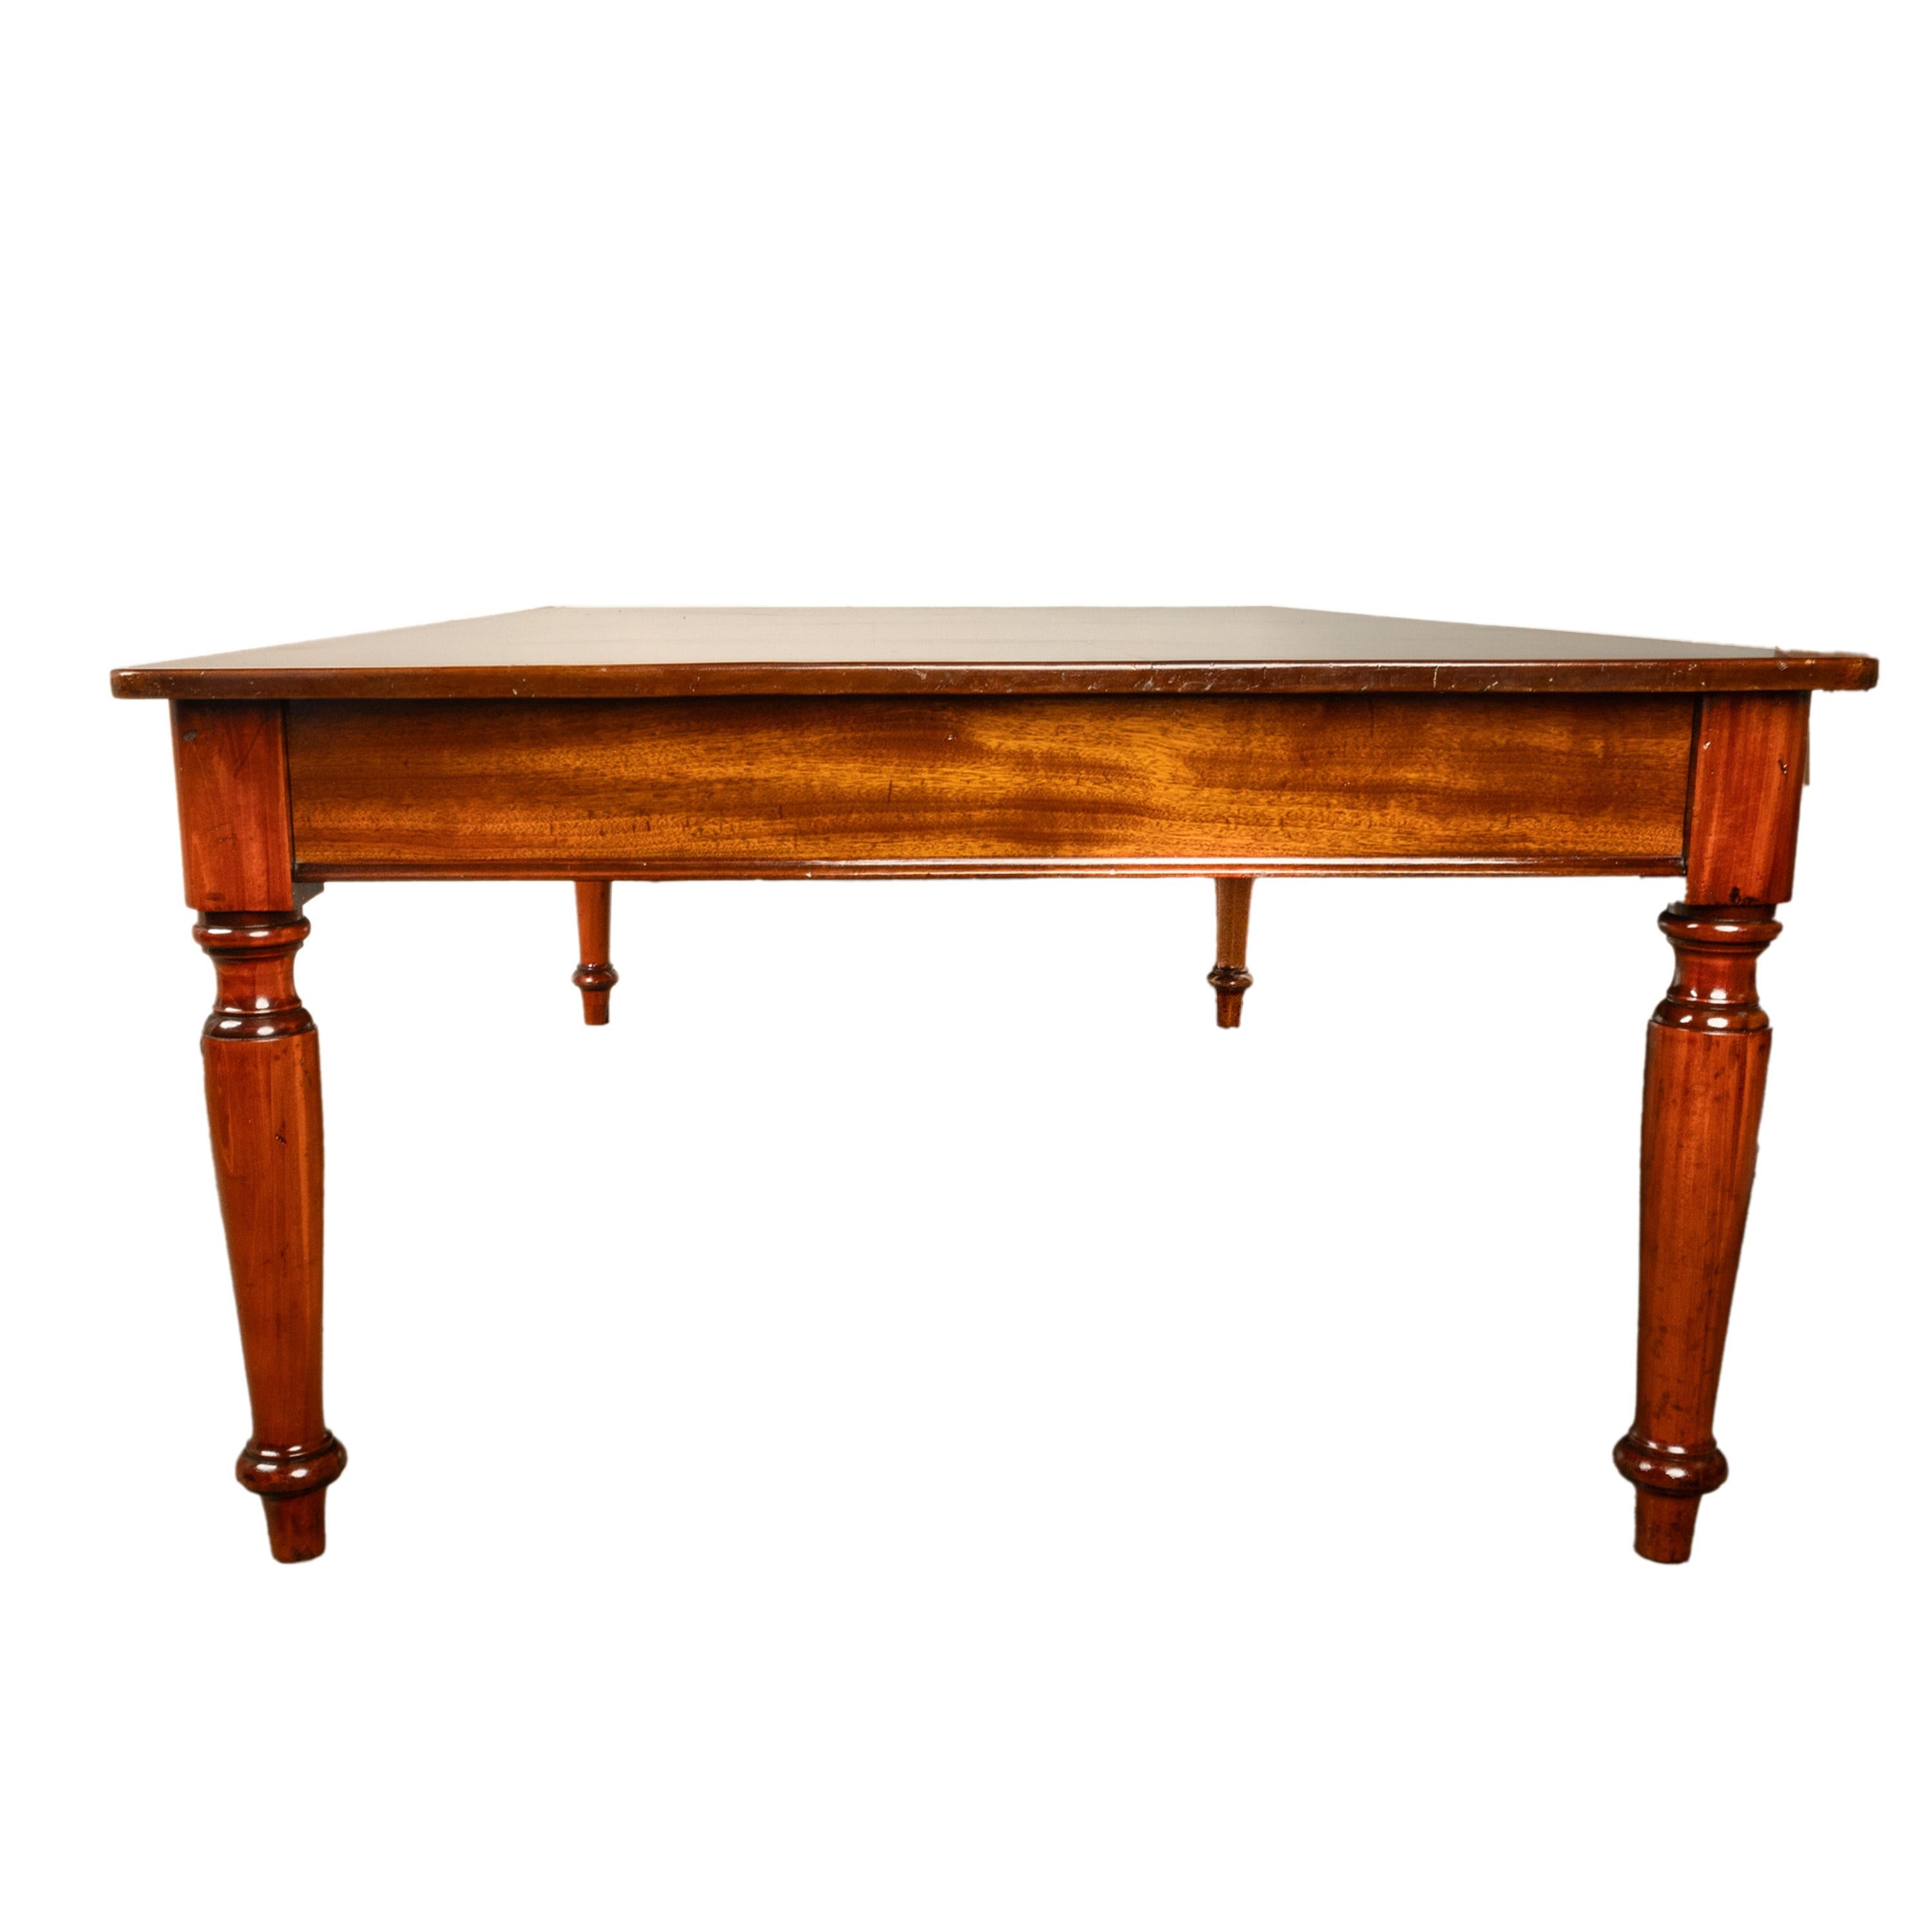 Antique Monumental 19th Century Mahogany Library Conference Dining Table 1860 For Sale 4